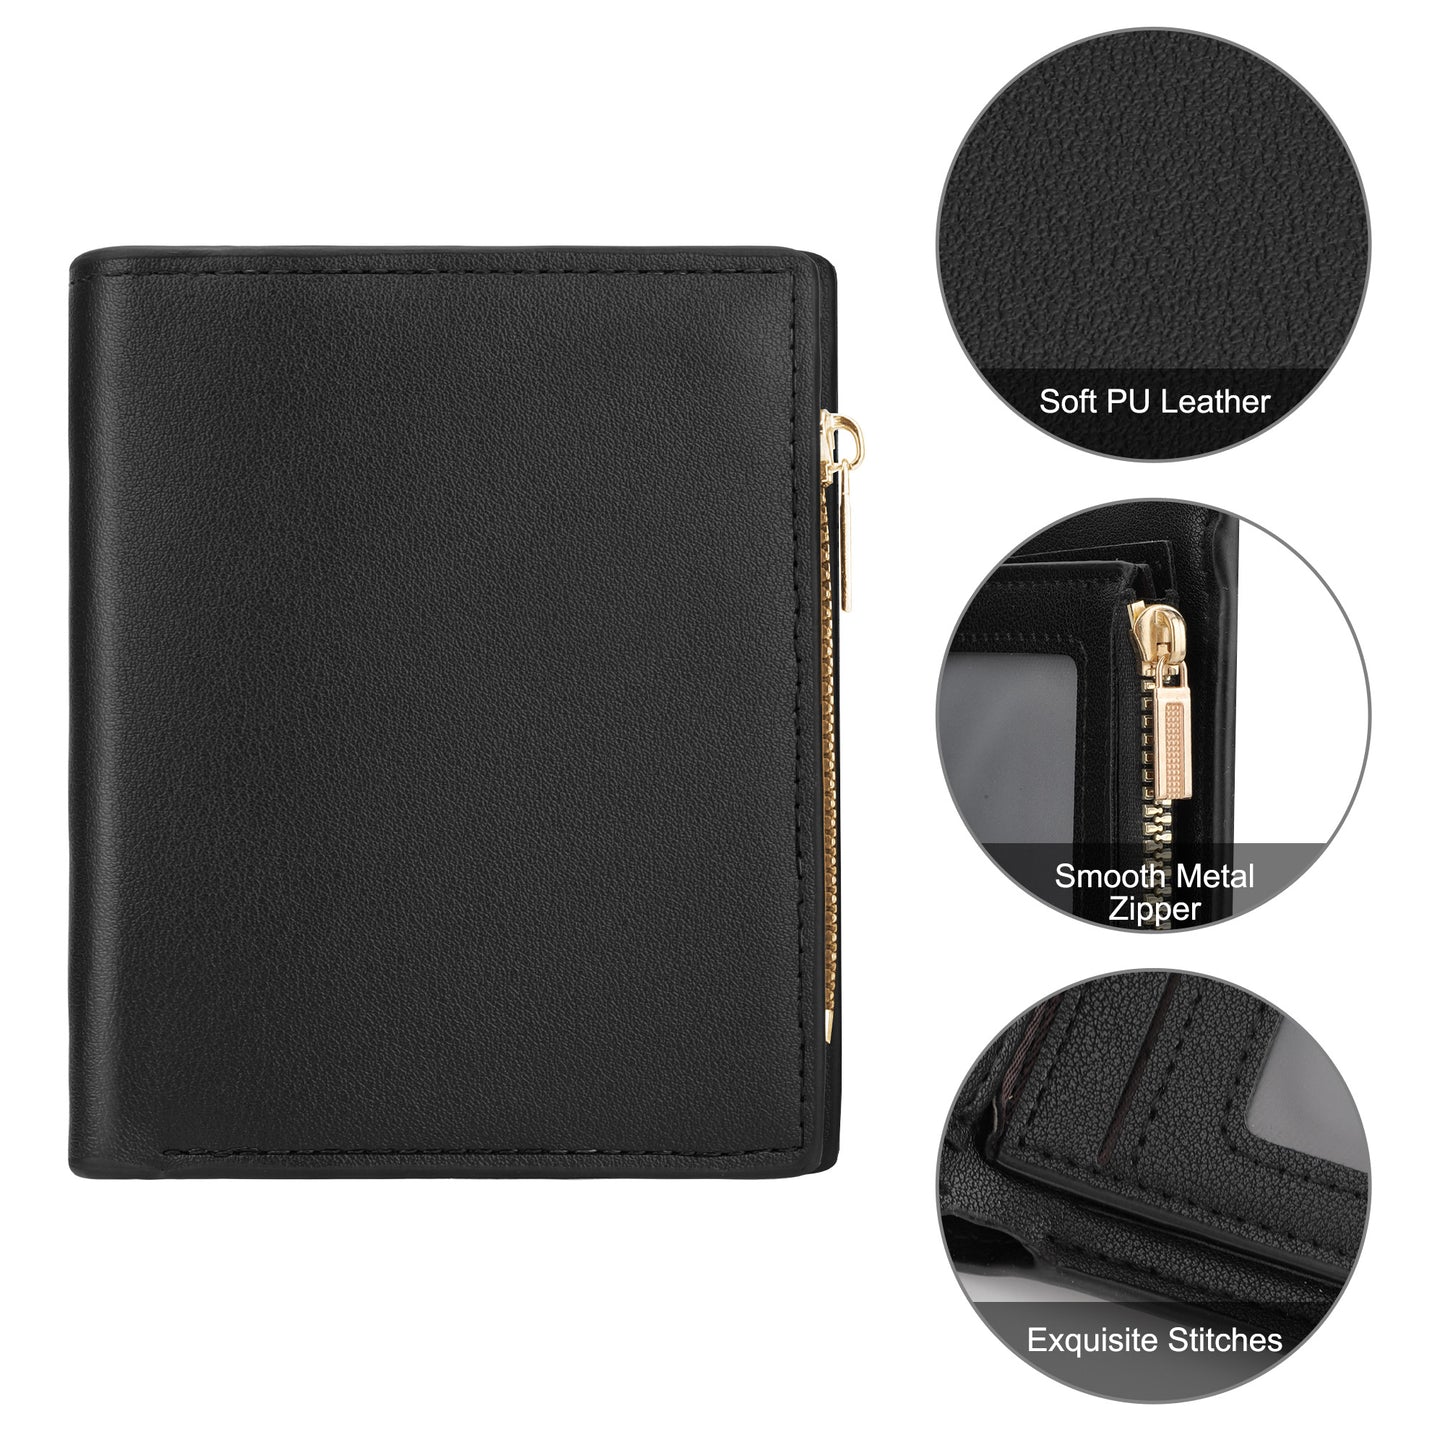 Unisex Slim Short Wallet - Fashionable Business Multi Card Wallet,PU leather Solid Color ID Short Wallet for Men and Women (Black)